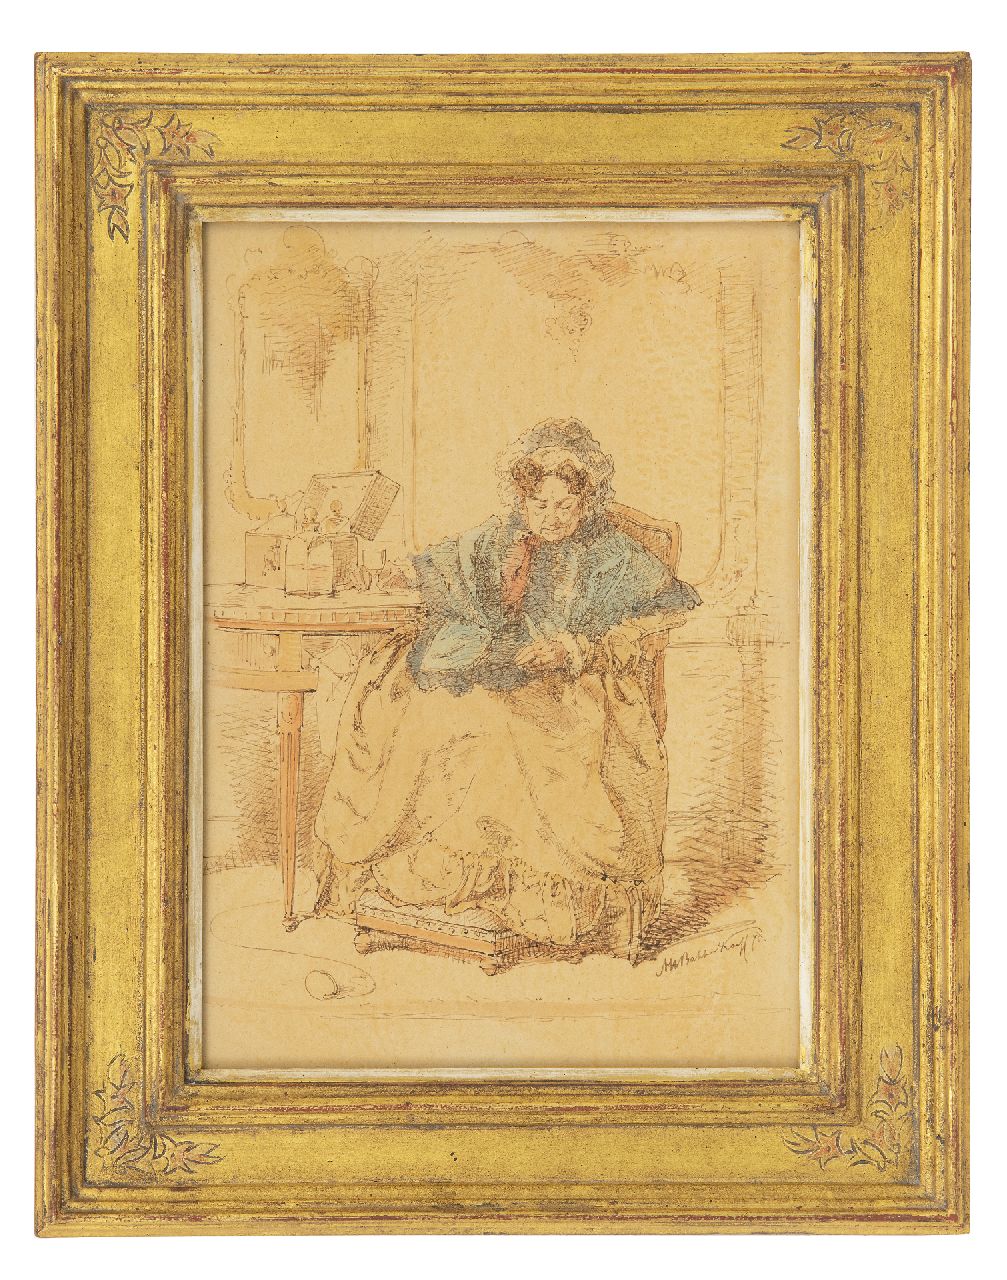 Bakker Korff A.H.  | Alexander Hugo Bakker Korff | Watercolours and drawings offered for sale | The glass of port wine, pen, ink and watercolour on paper 30.0 x 21.4 cm, signed l.r. and dated '75